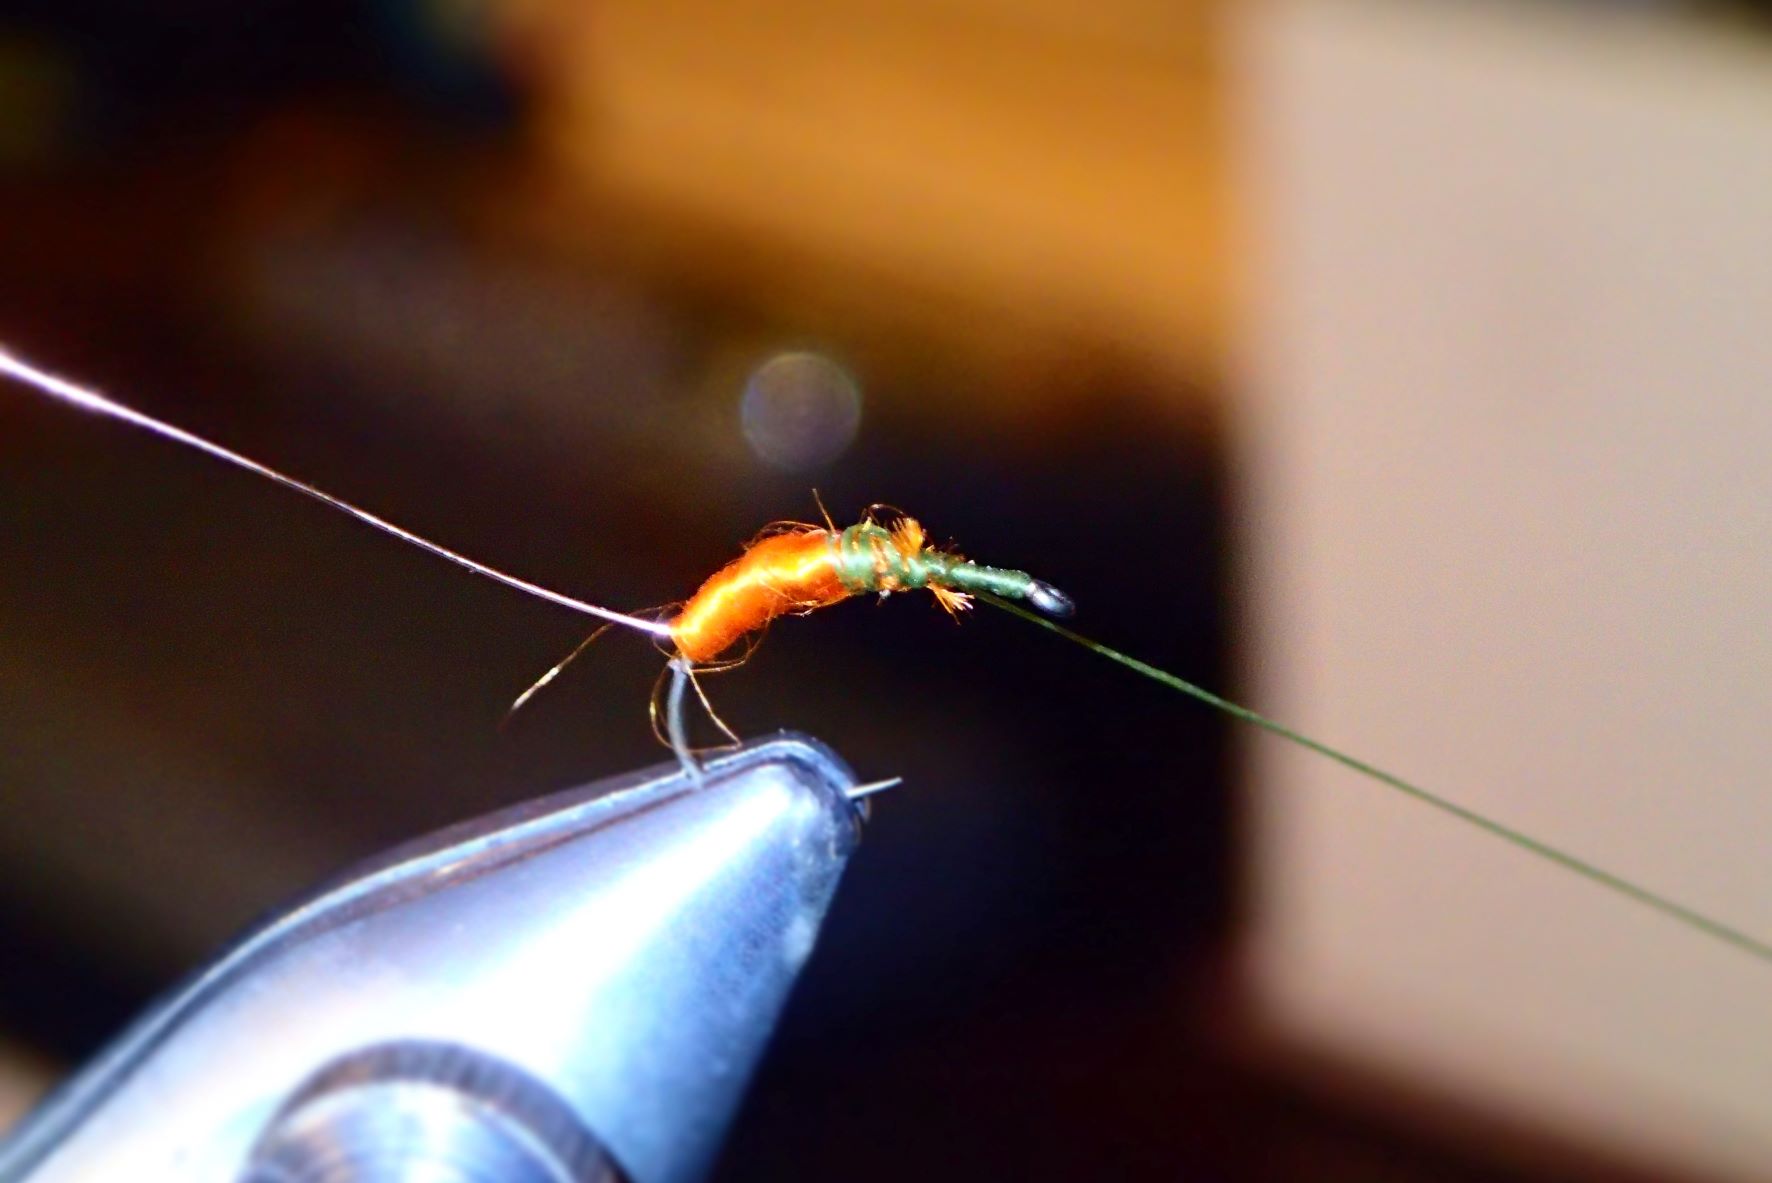 Popo up emerger mouche fly flytying emergente eclosion